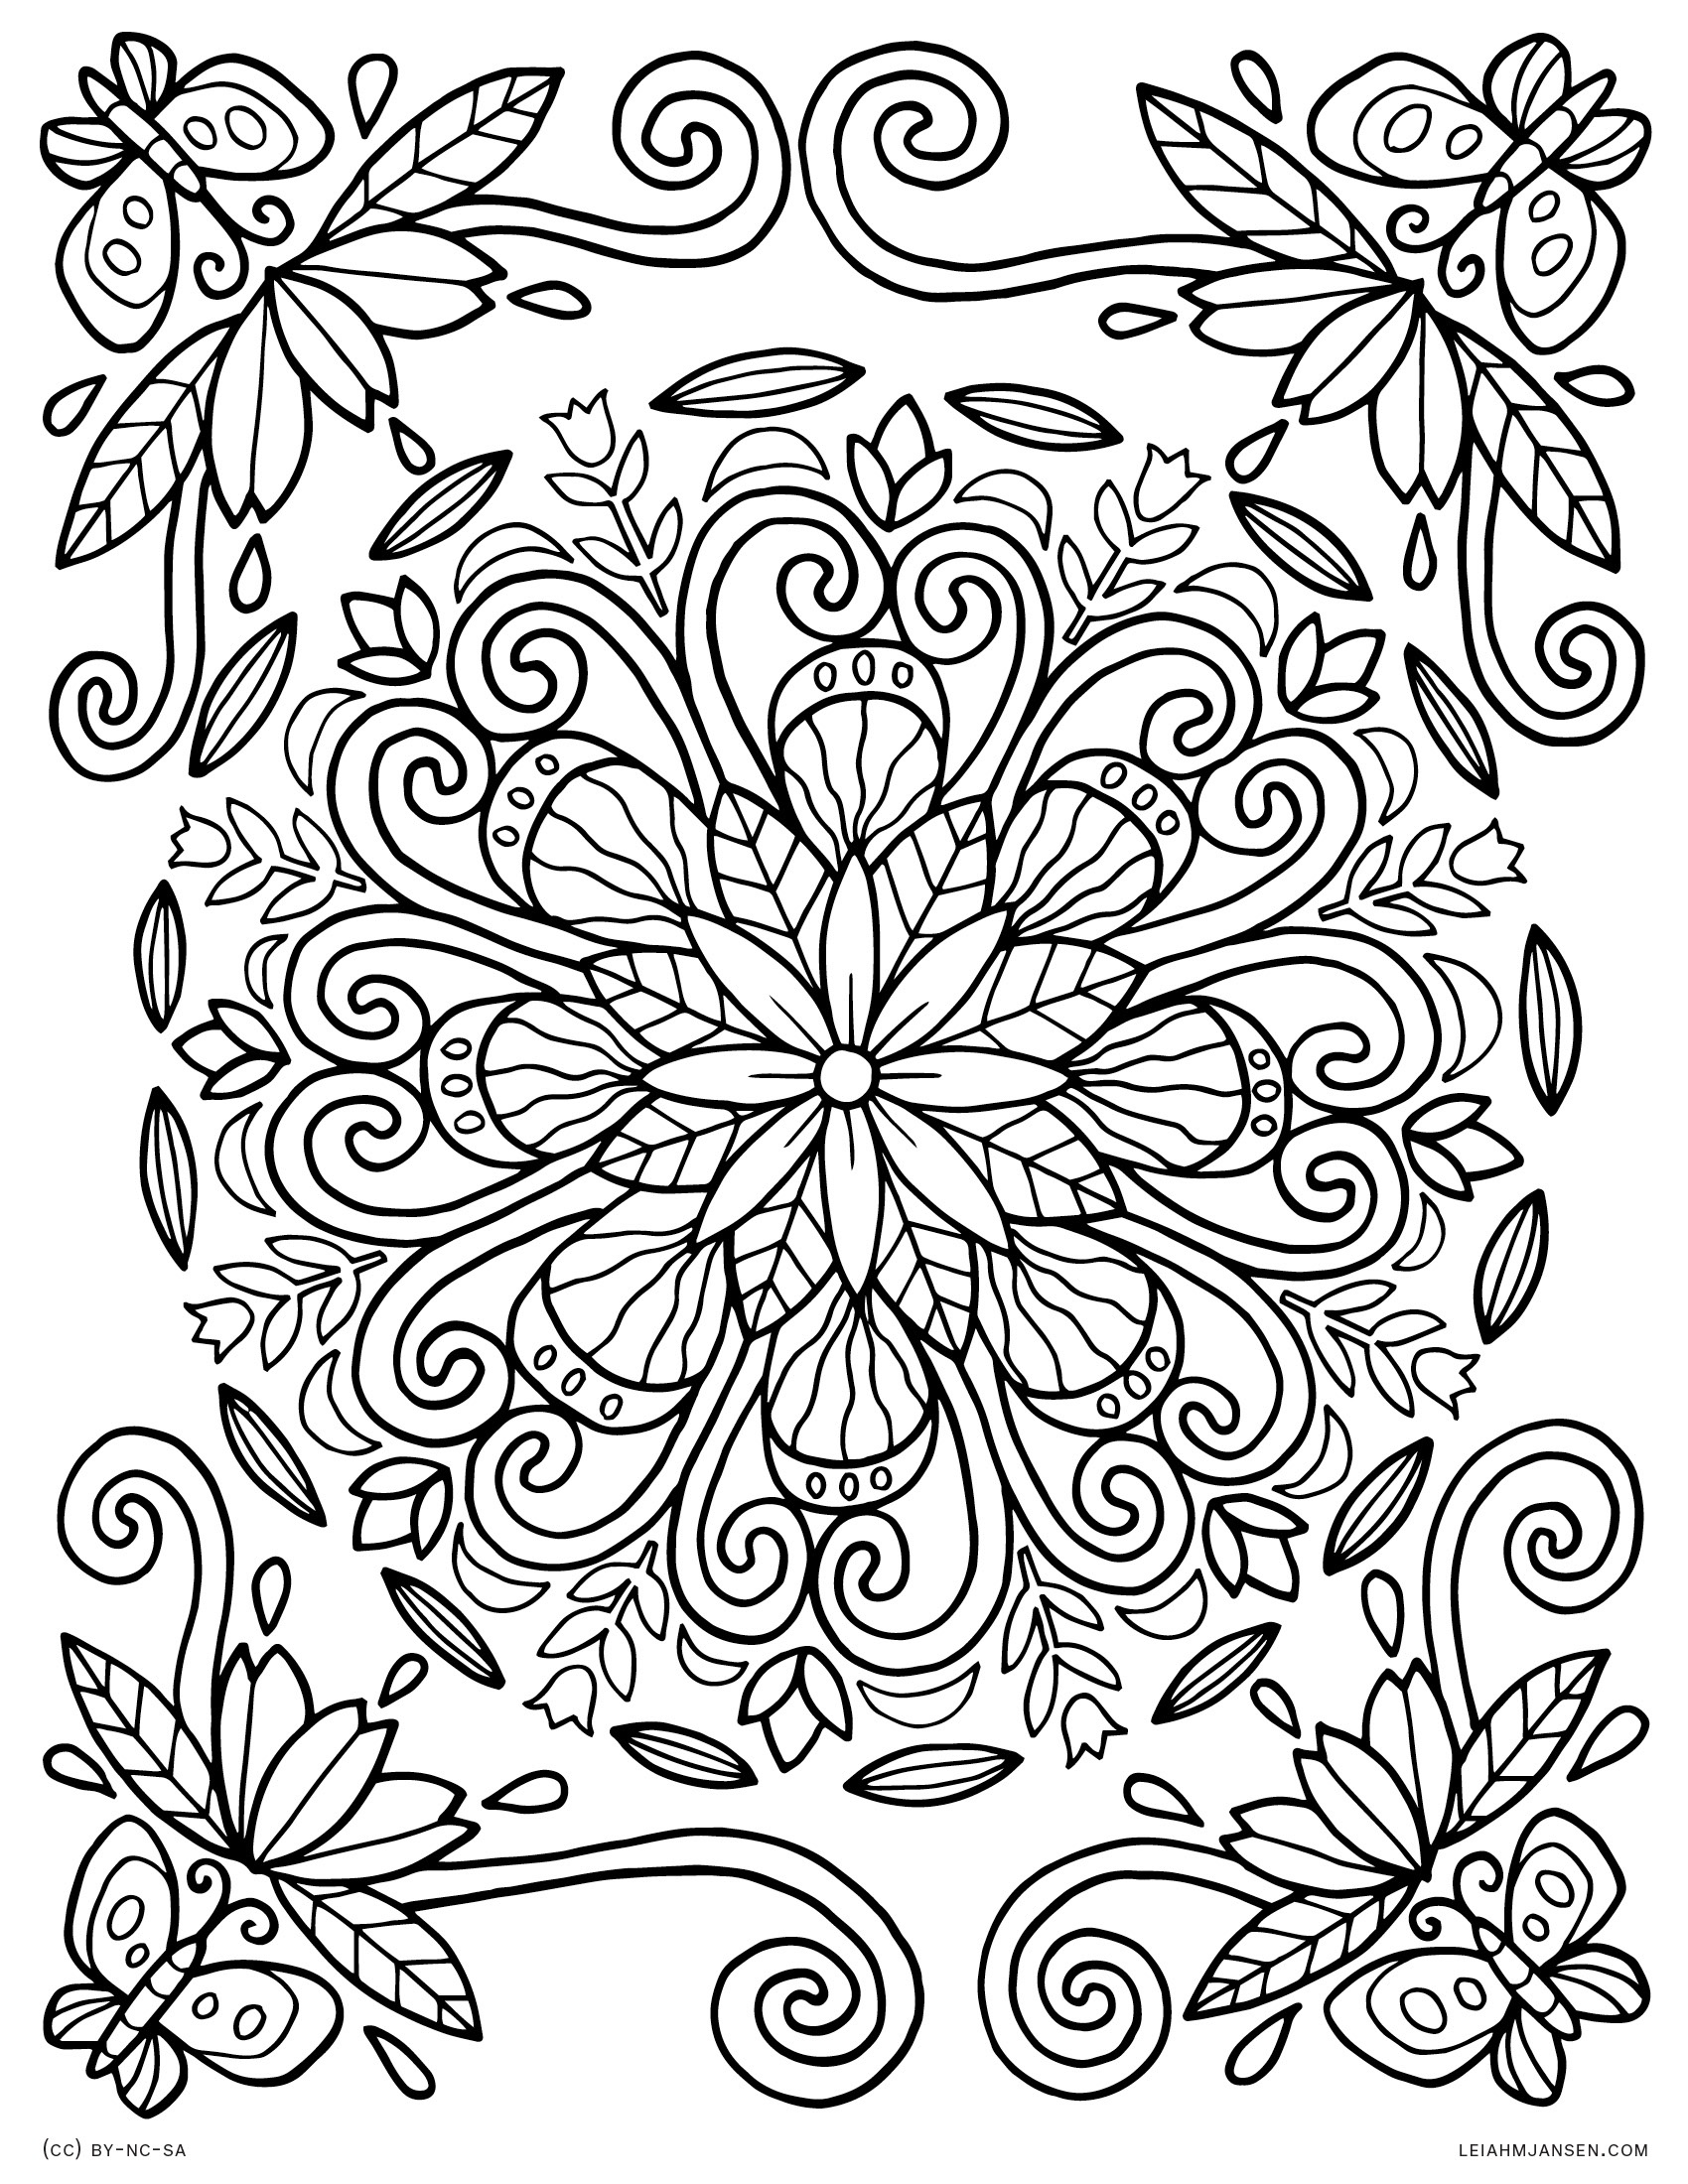 Coloring Pages - Free Printable Nature Coloring Pages